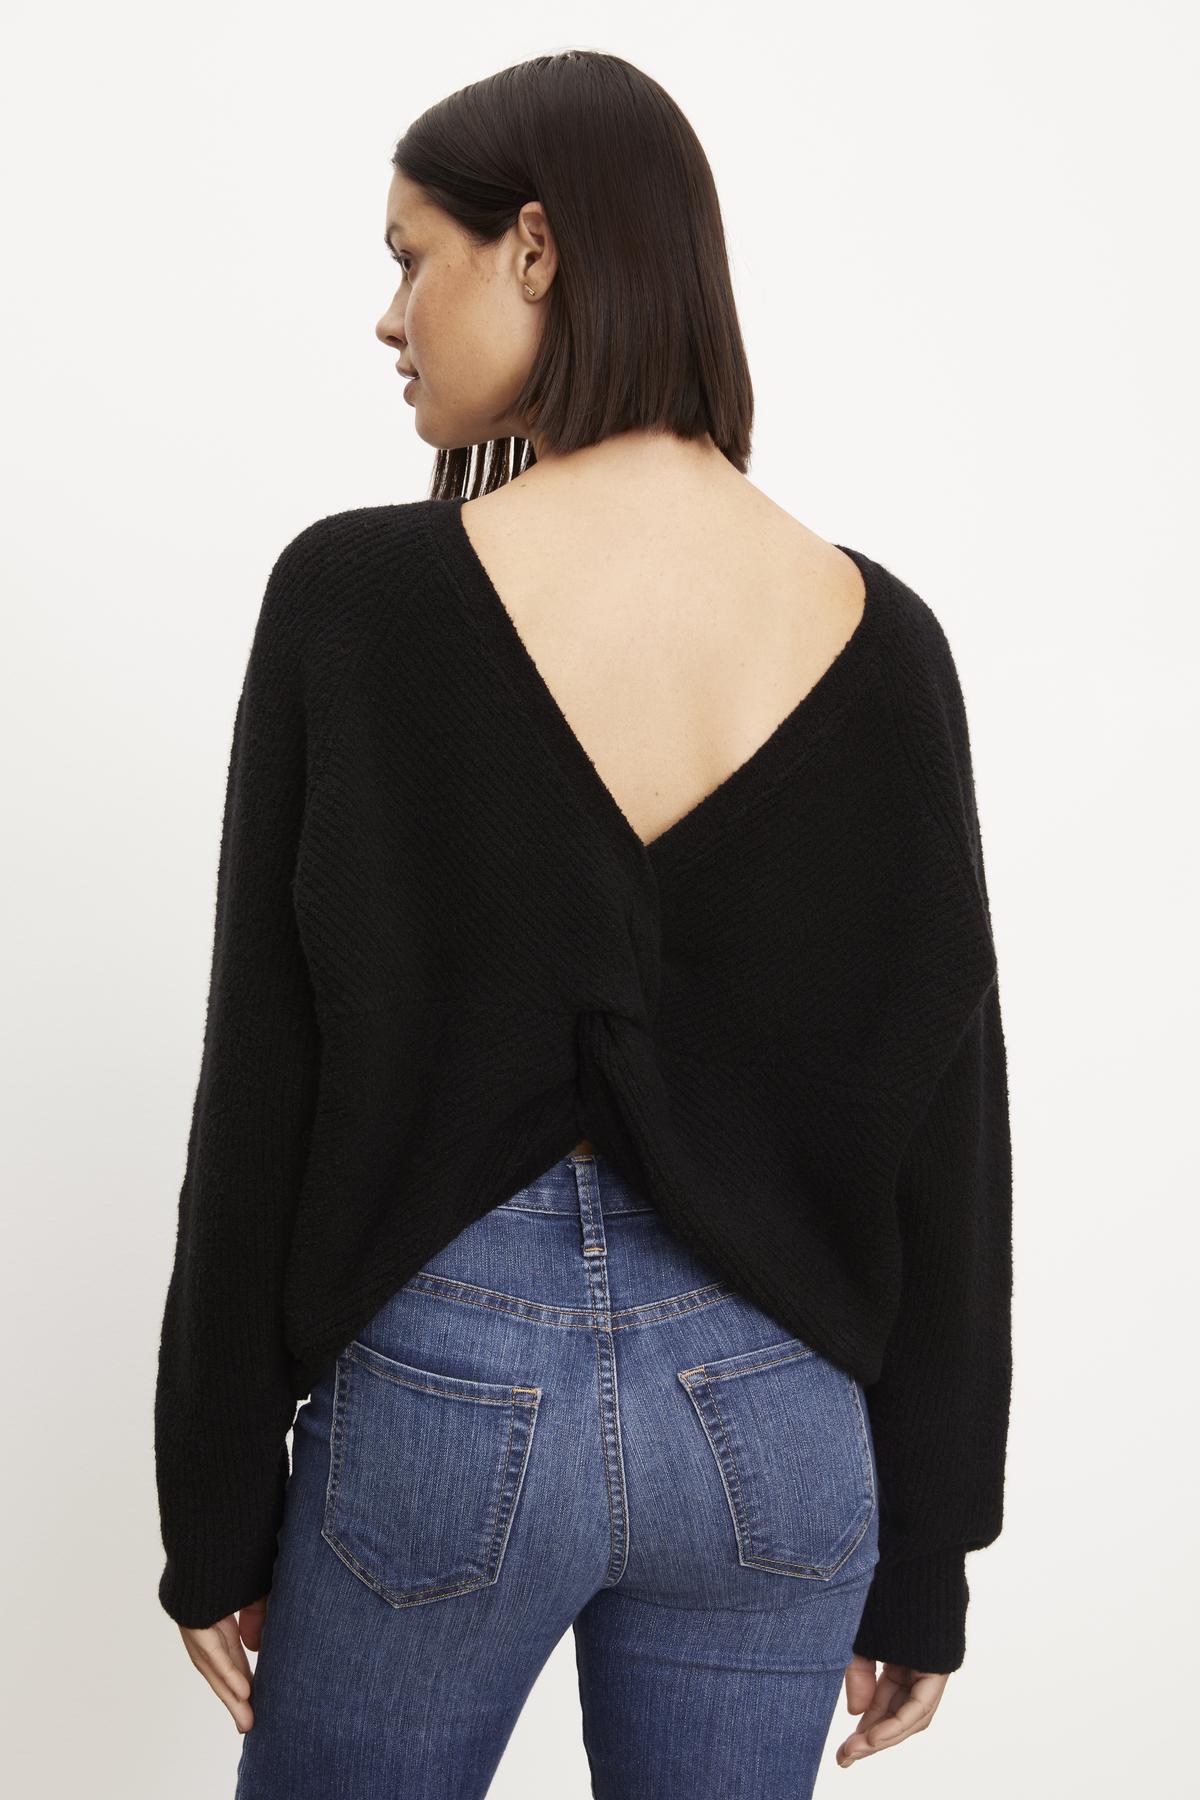 The back view of a woman wearing a black Velvet by Graham & Spencer Caitlyn Boucle Raglan sweater and jeans.-36094304649409